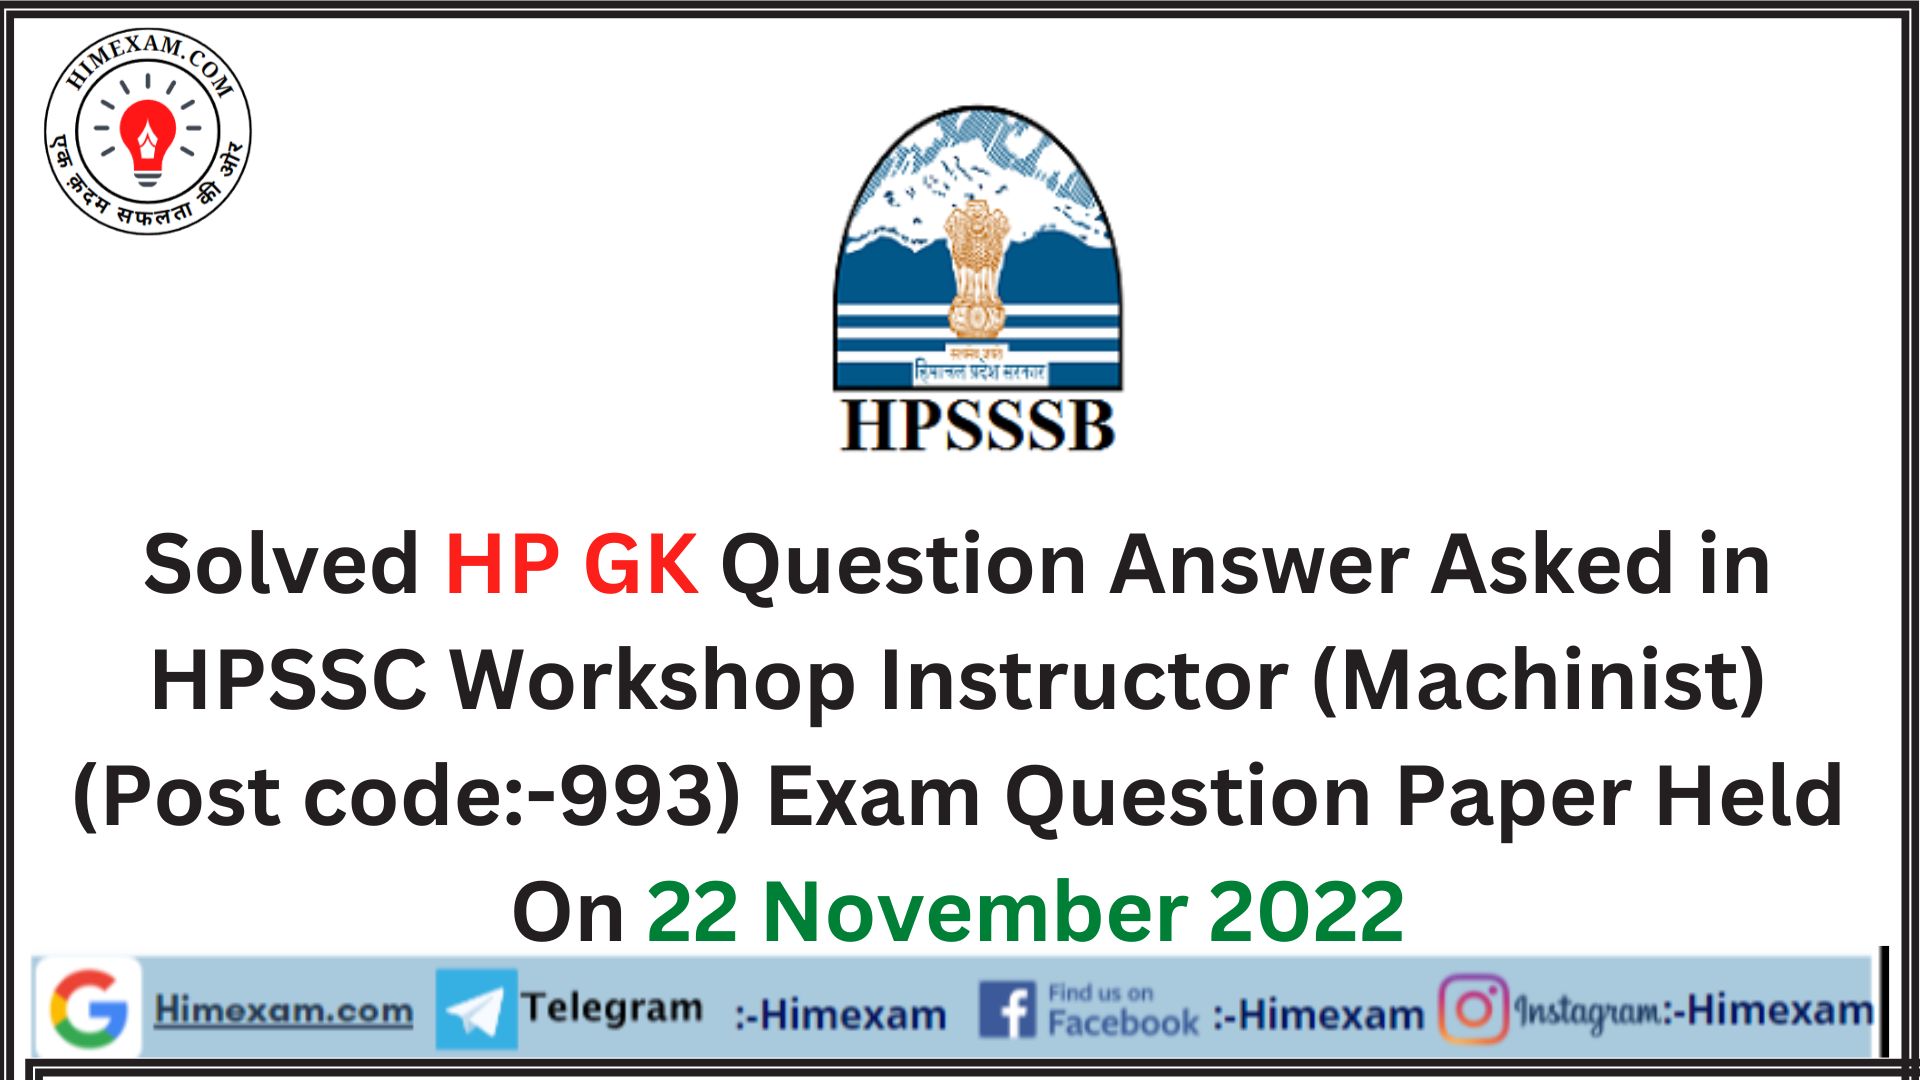 Solved HP GK Question Answer Asked in HPSSC Workshop Instructor (Machinist) (Post code:-993) Exam Question Paper Held On 22 November 2022